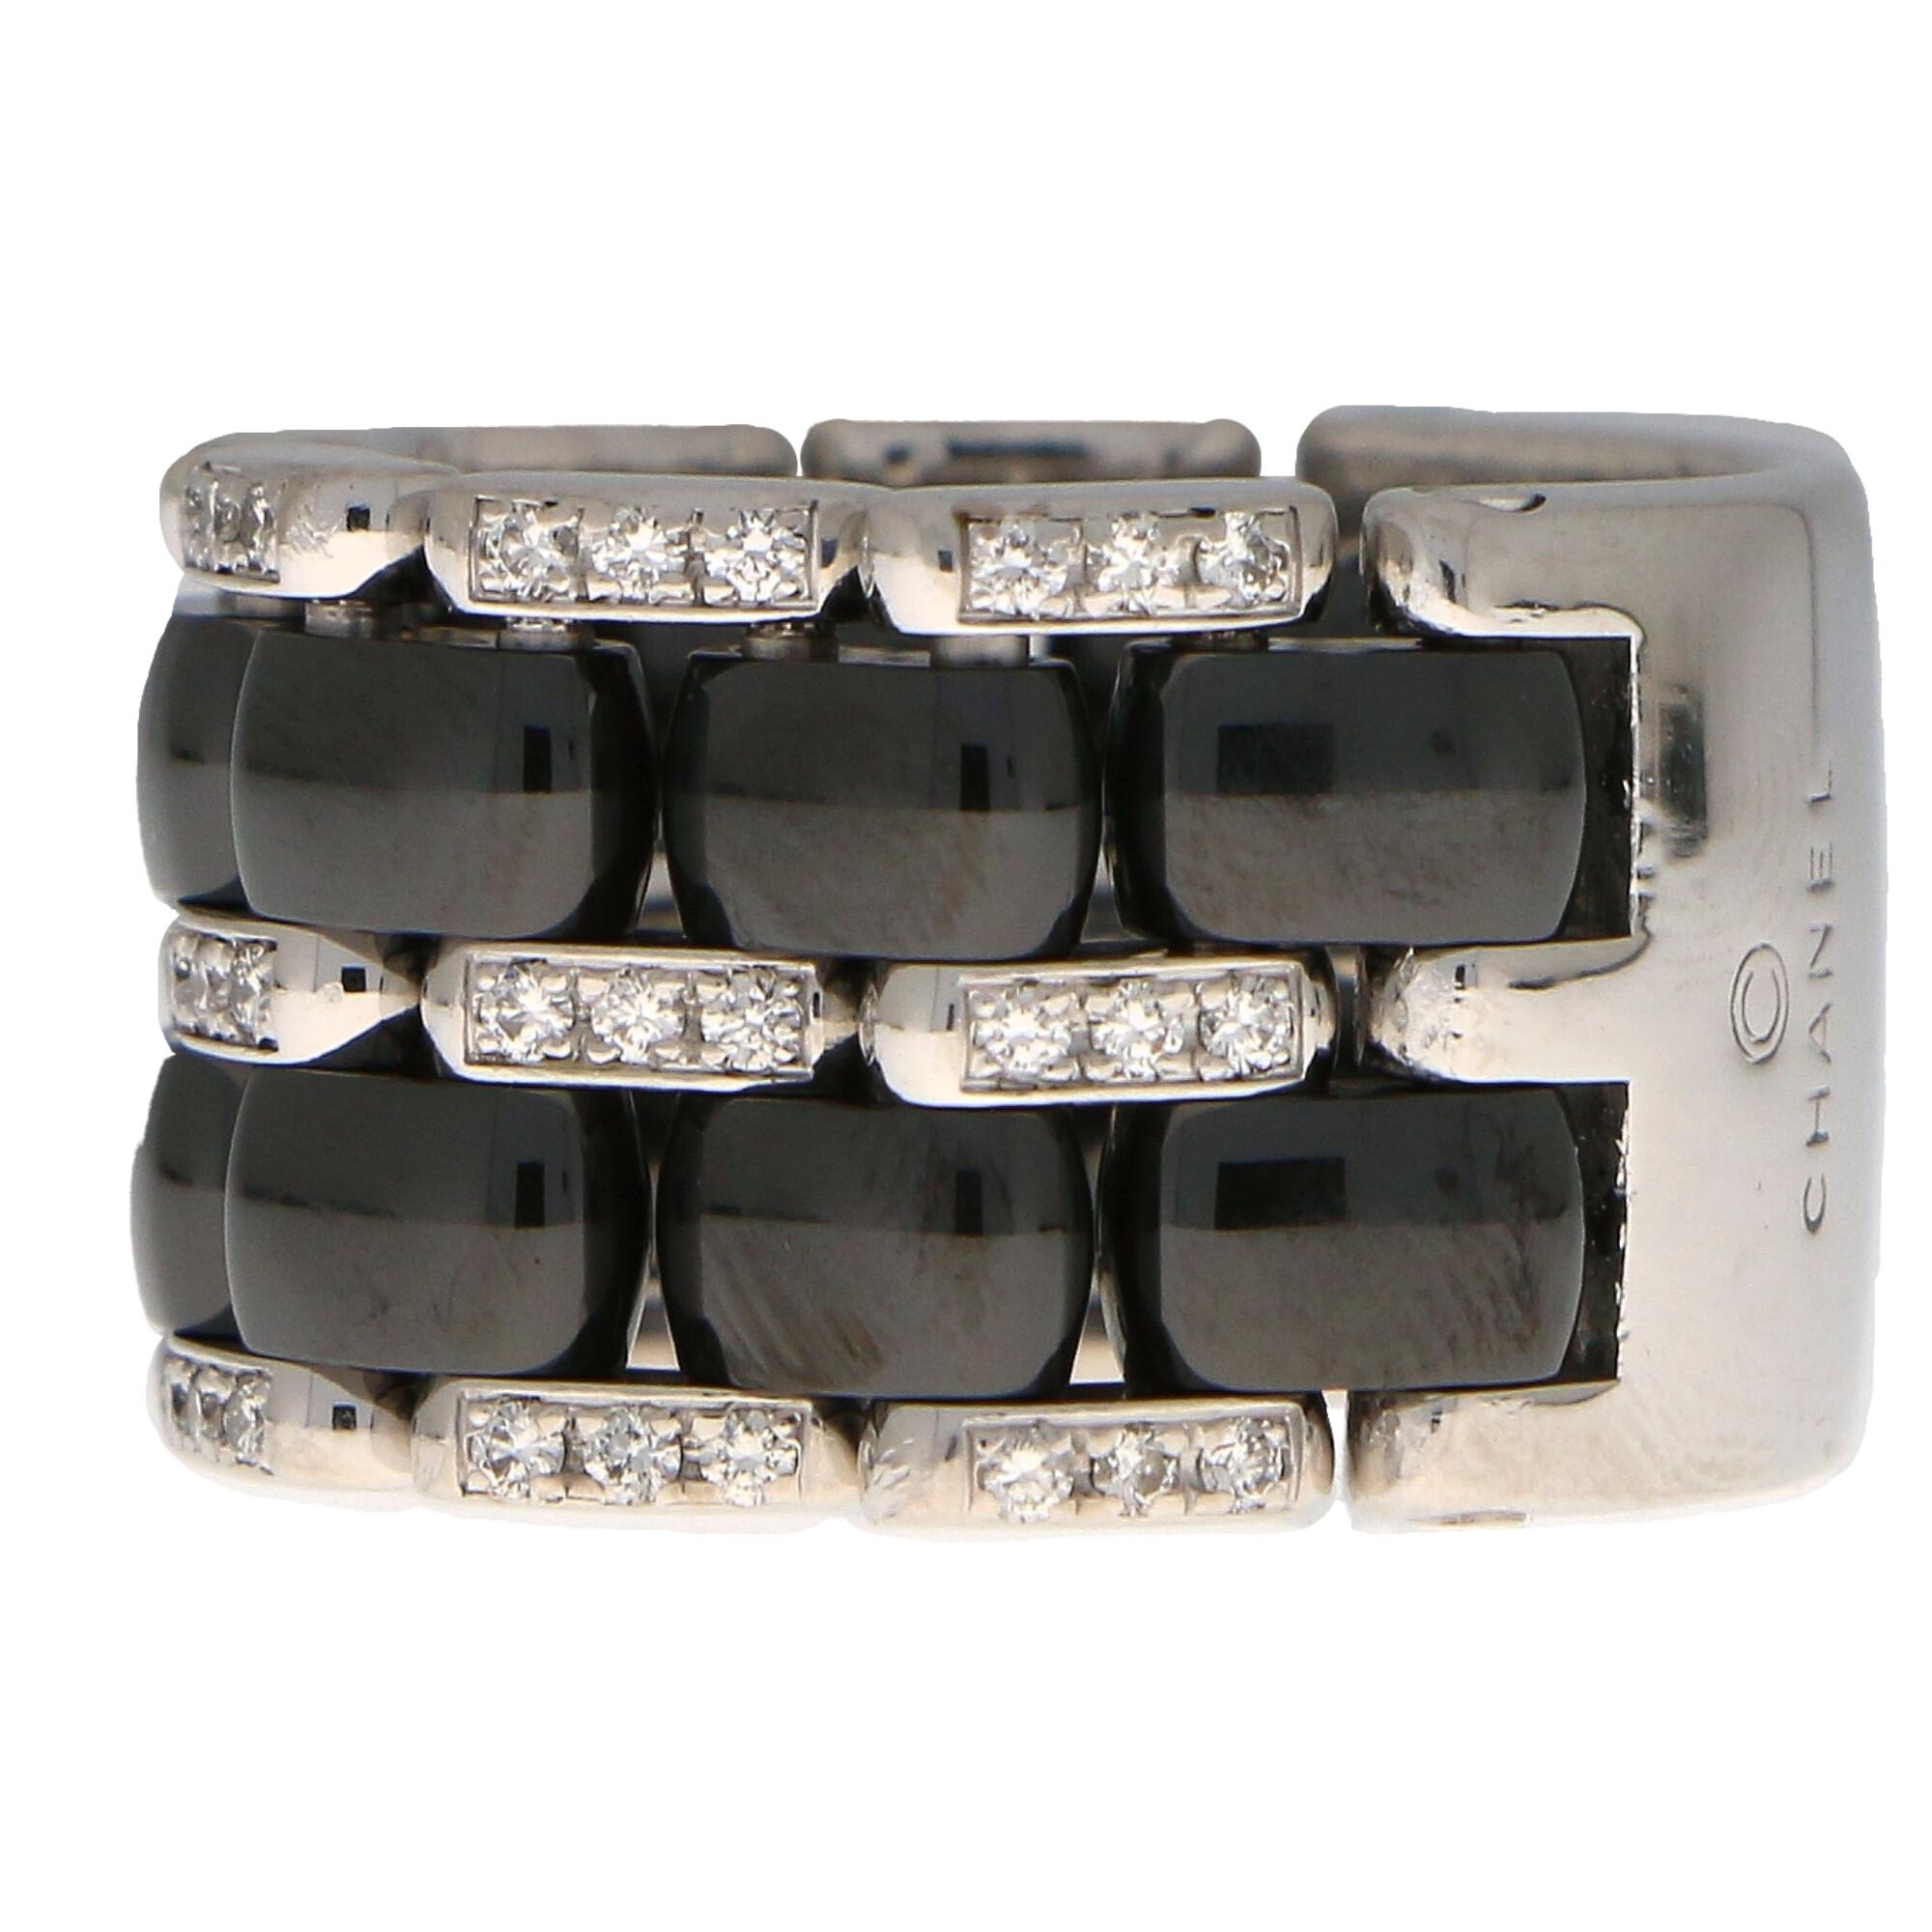 A lovely CHANEL diamond and ceramic flexible Ultra ring set in 18k white gold.

The ring is composed of five rows of alternating black ceramic and white gold links set with diamonds. These links are articulated and follow round to a solid white gold